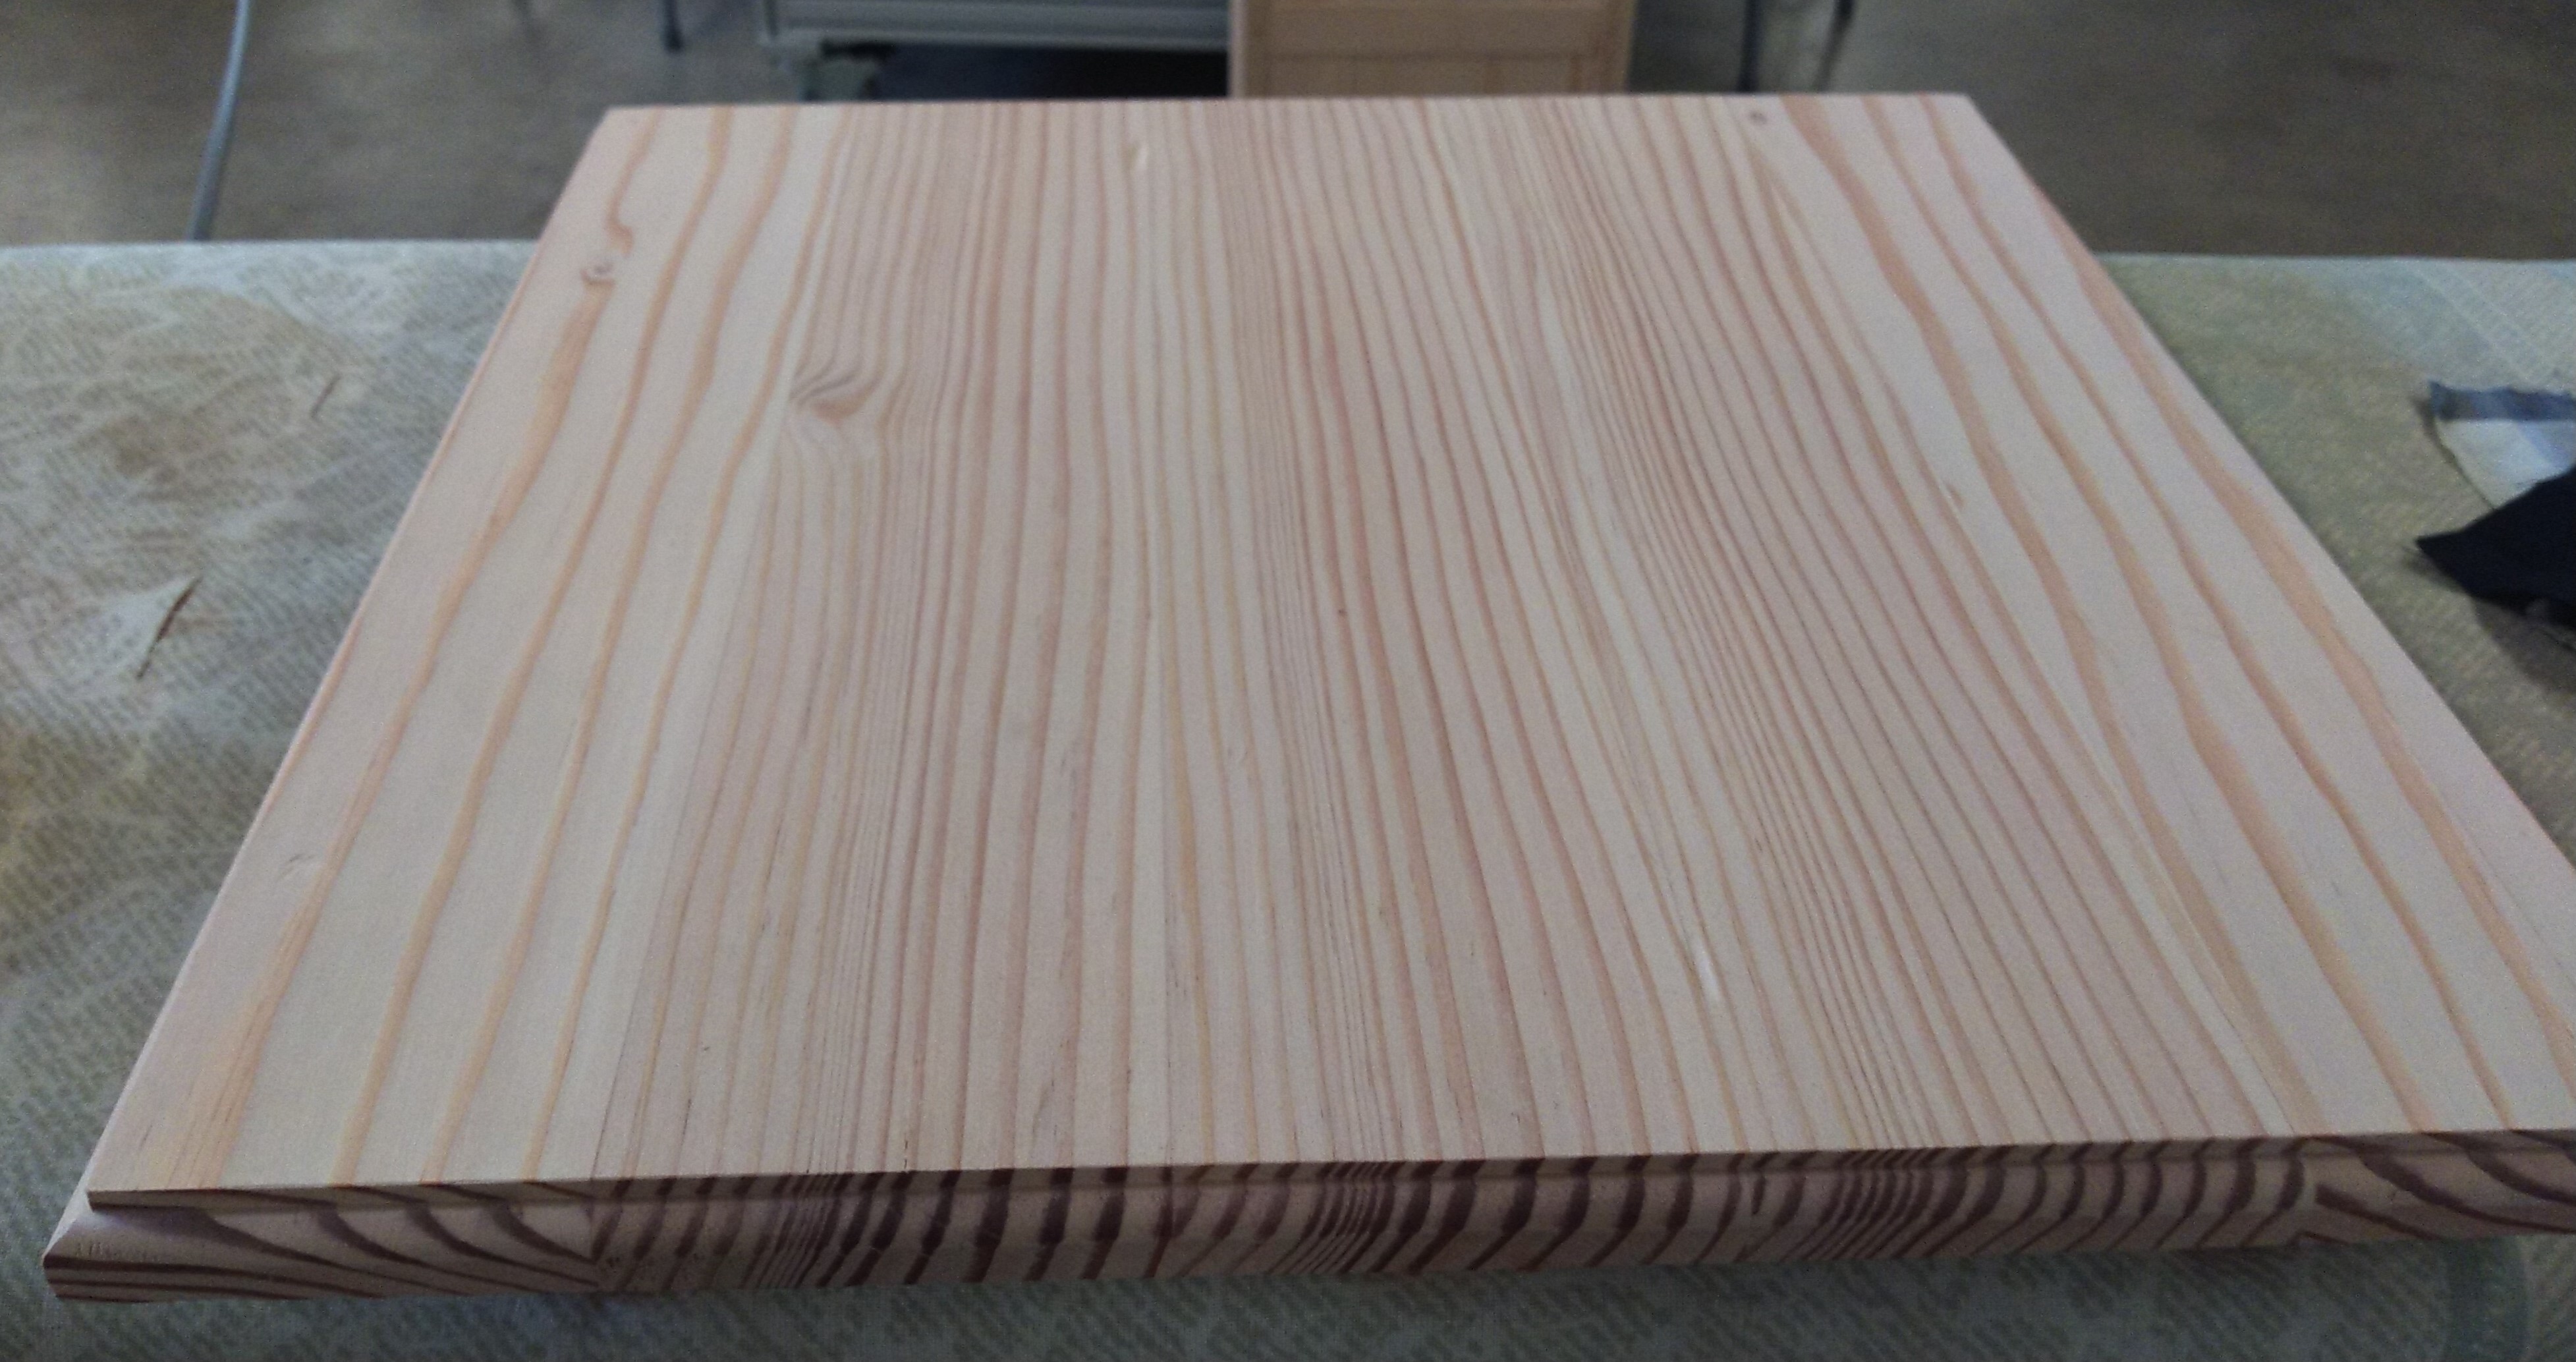 A roughly square piece of wood with a routed profile around the edges